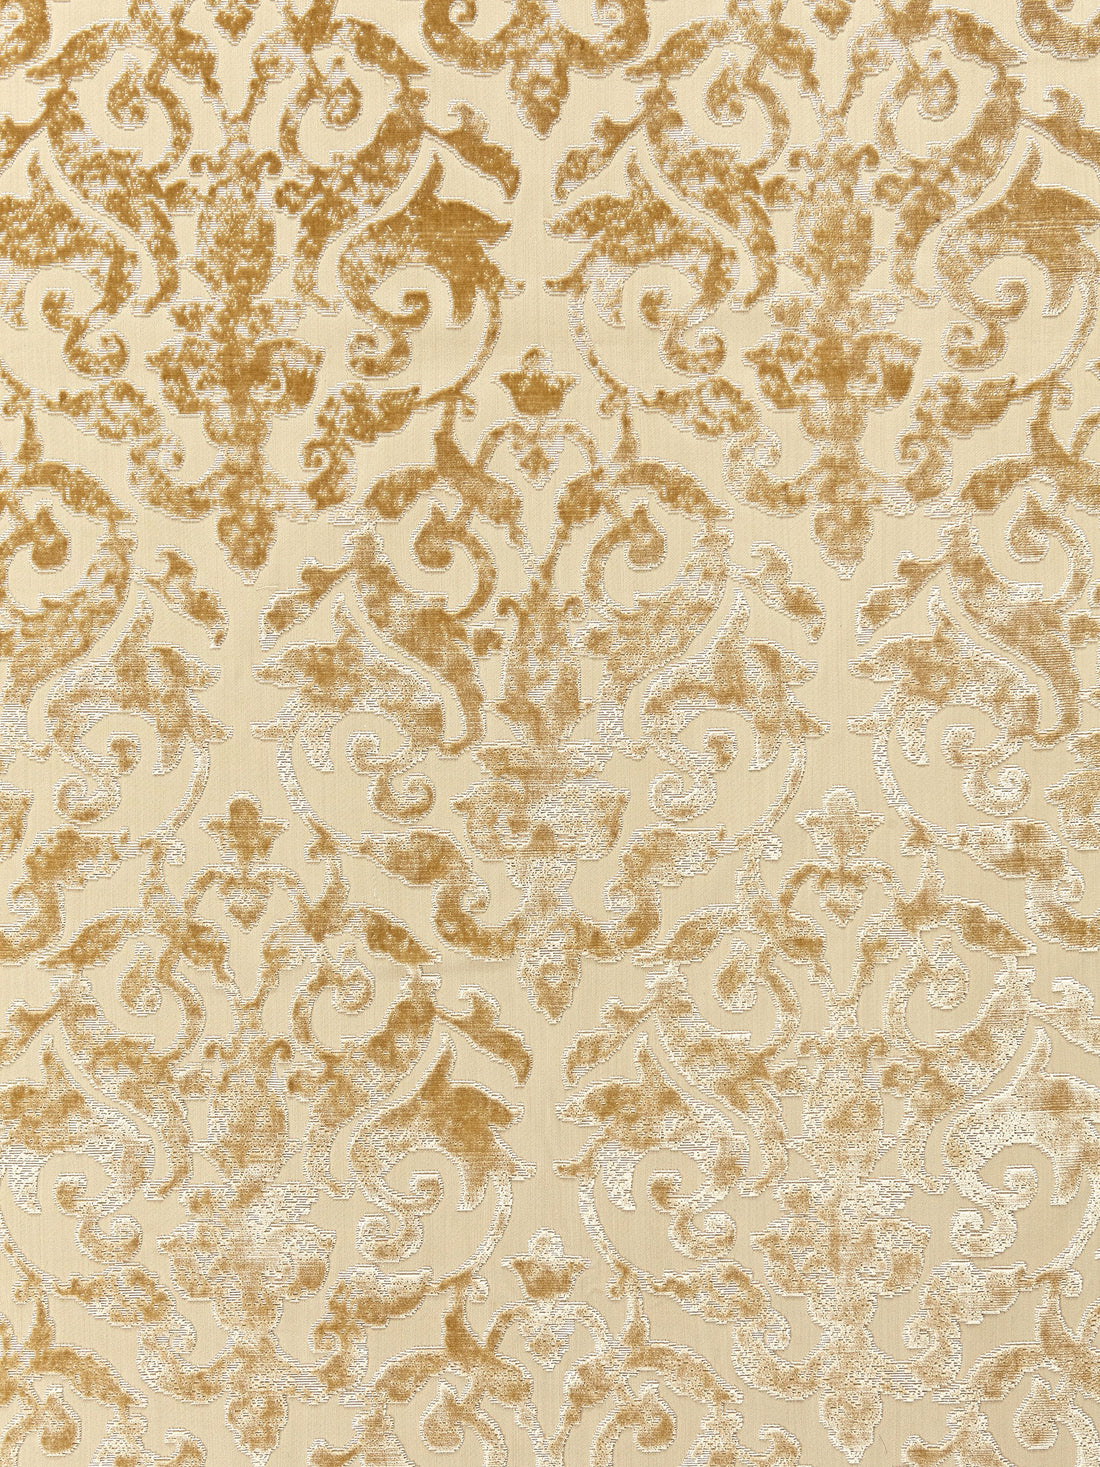 Venezia Silk Velvet fabric in champagne color - pattern number SC 000127078 - by Scalamandre in the Scalamandre Fabrics Book 1 collection